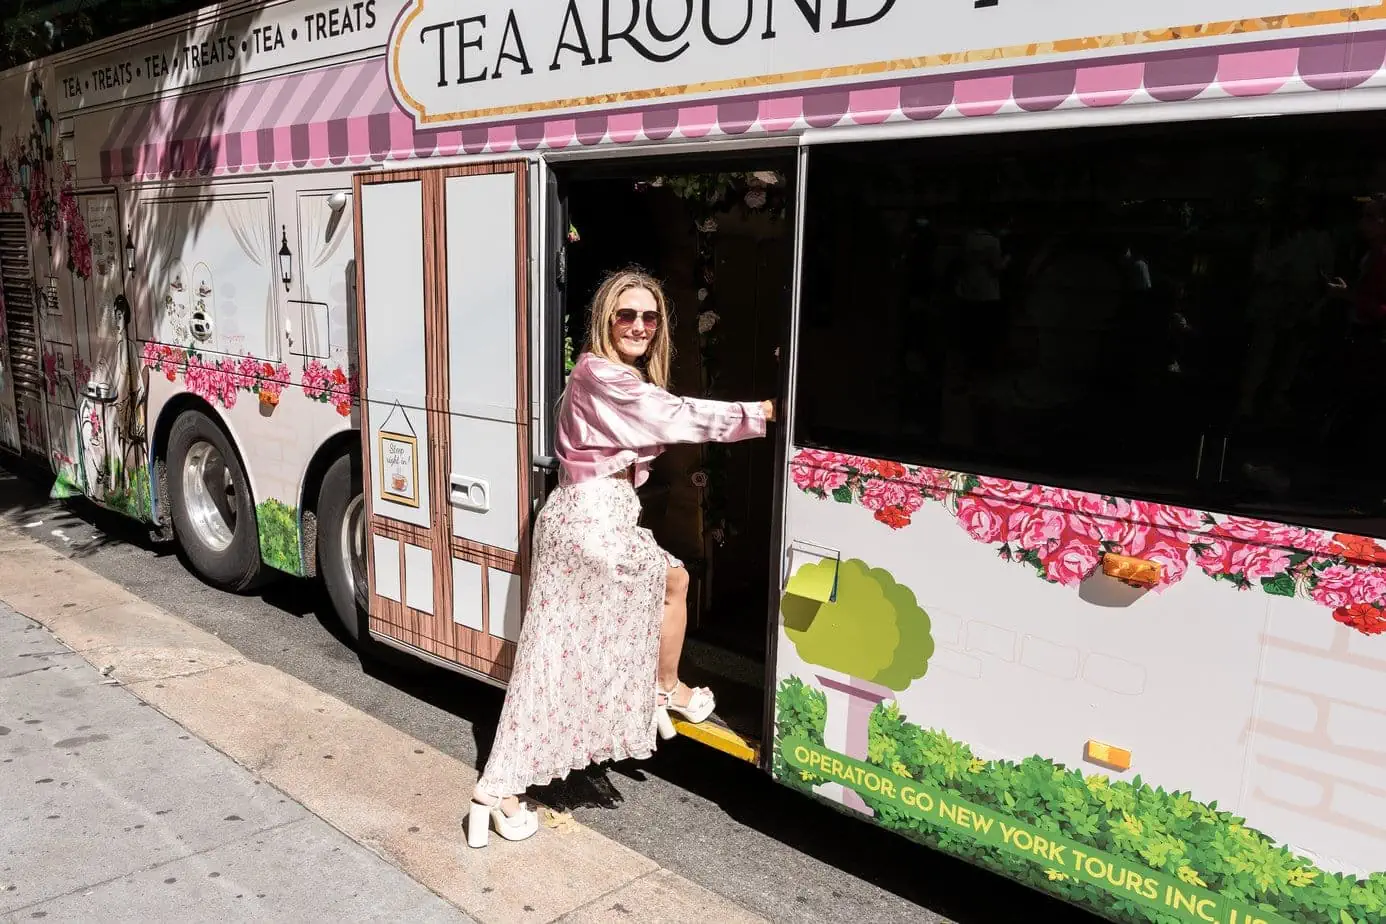 Brianne in Loveshackfancy pink outfit while stepping on to the Tea Around Town Tourist Bus in NYC